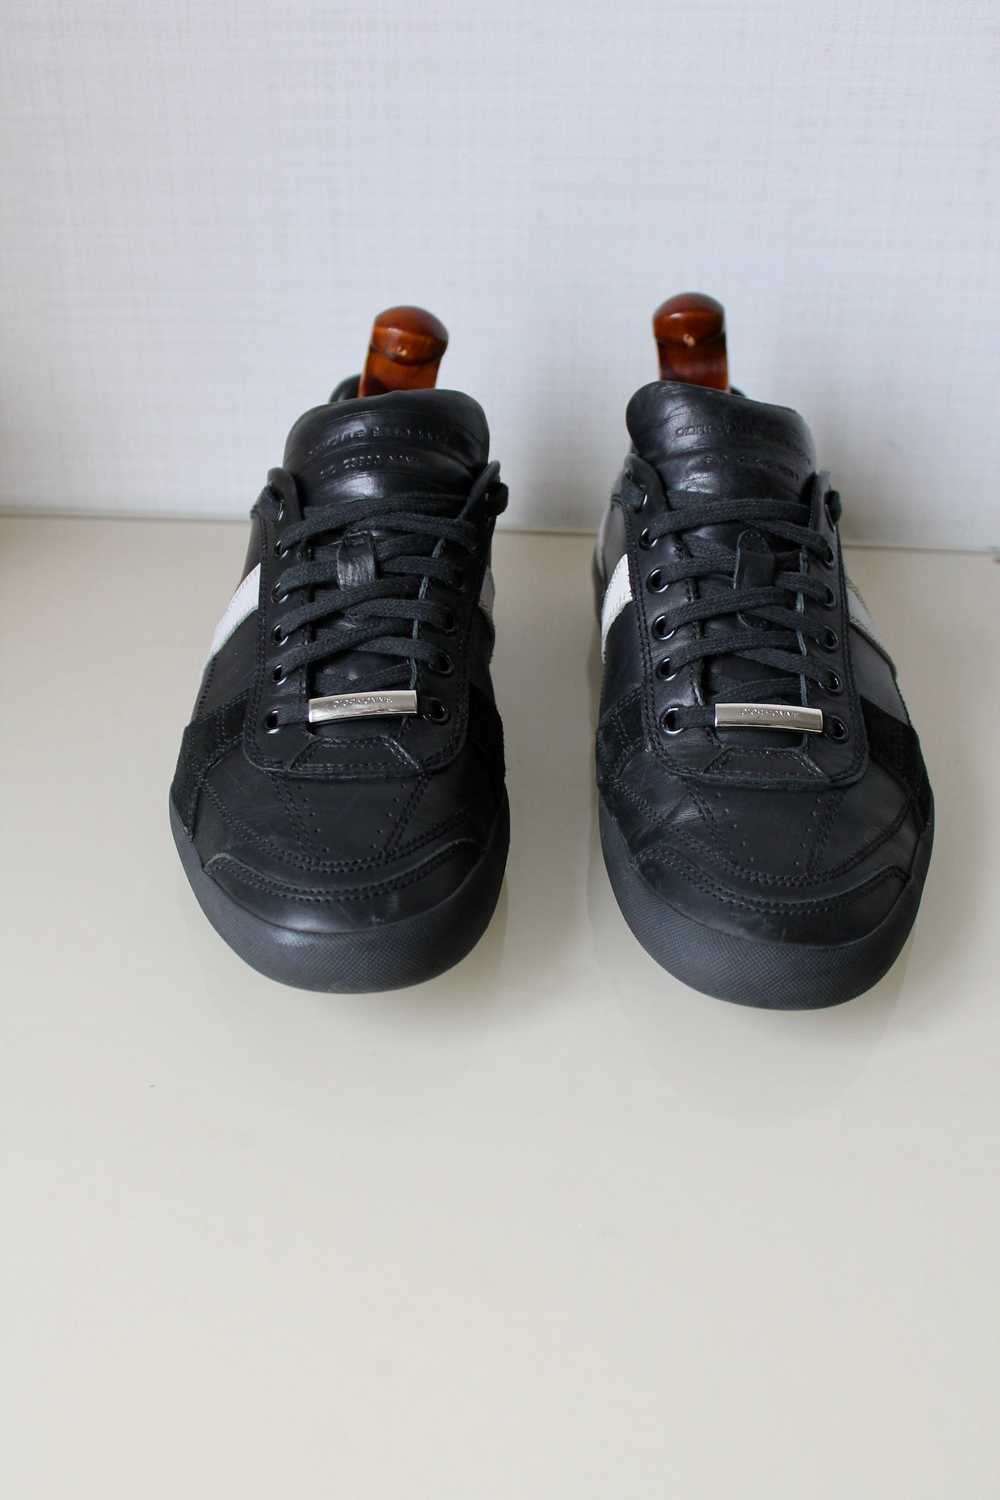 Dior DIOR HOMME Leather Low Top Sneakers Black - image 3